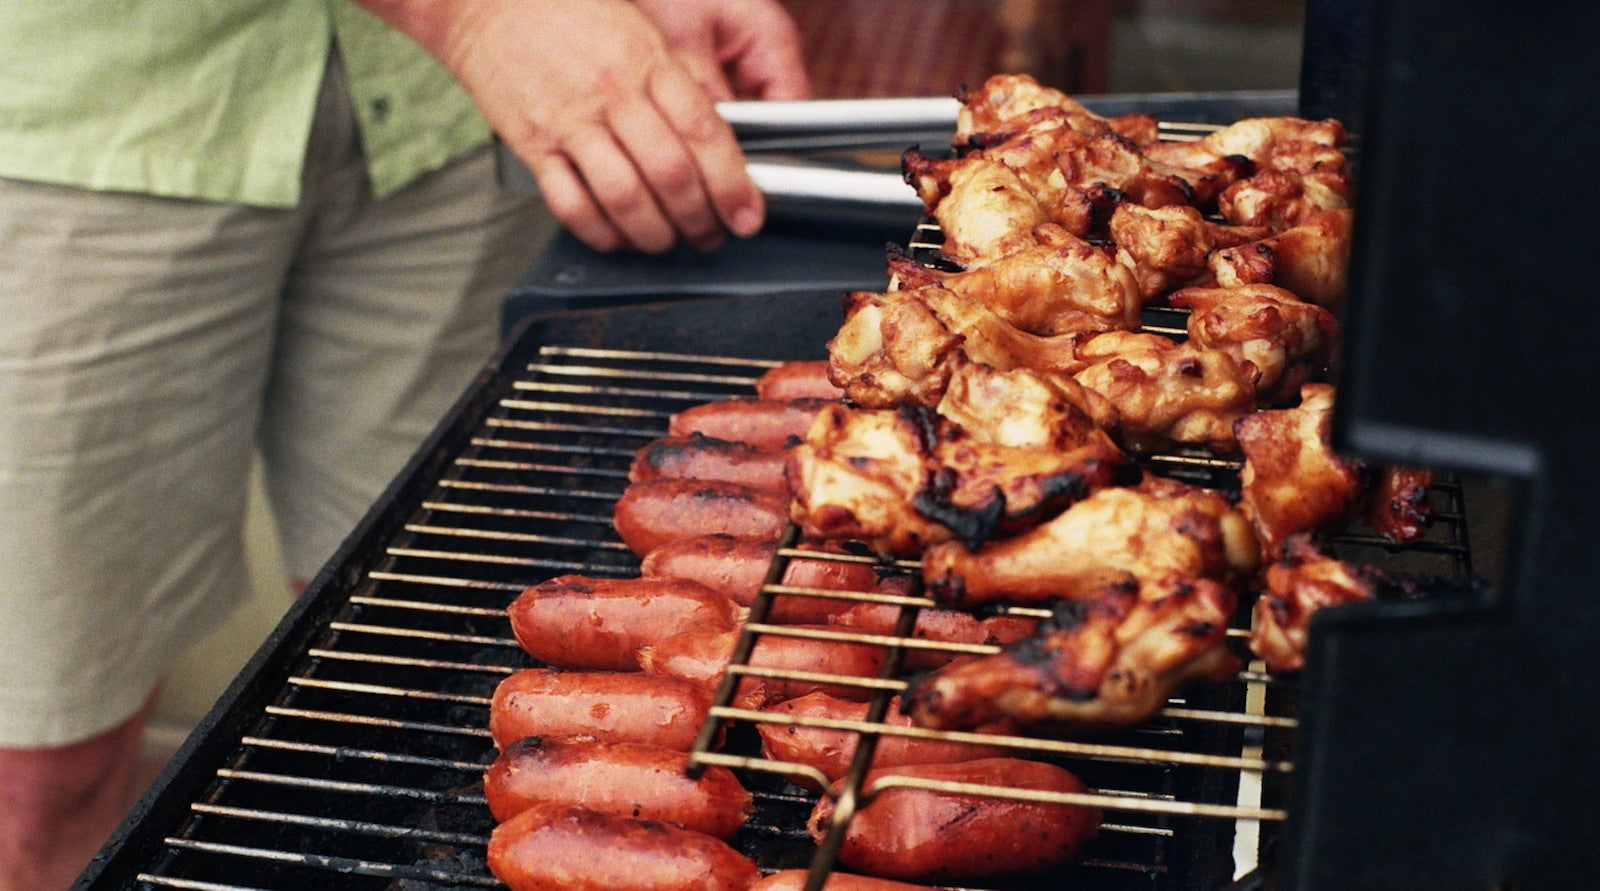 Prepare For Next Year’s Barbecue Right After This Year’s Barbecue 